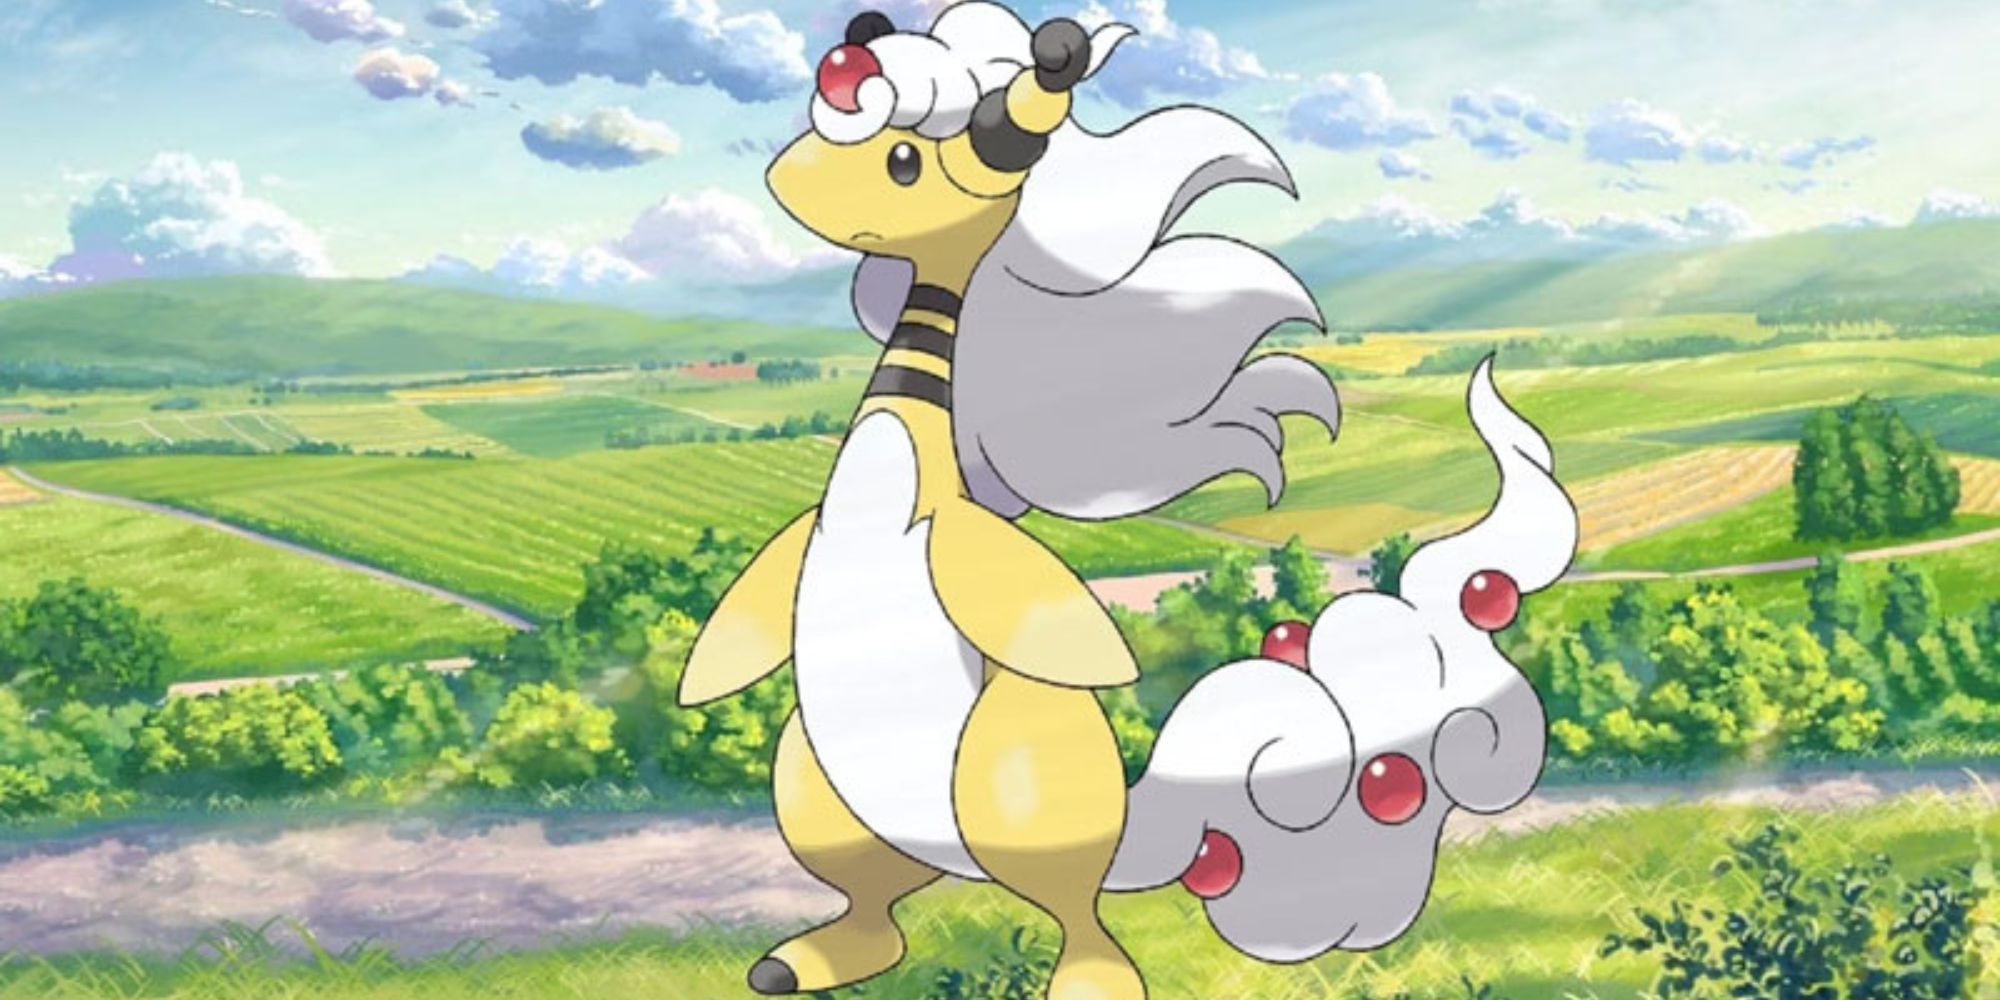 Mega Ampharos stands in a field with its hair flowing.